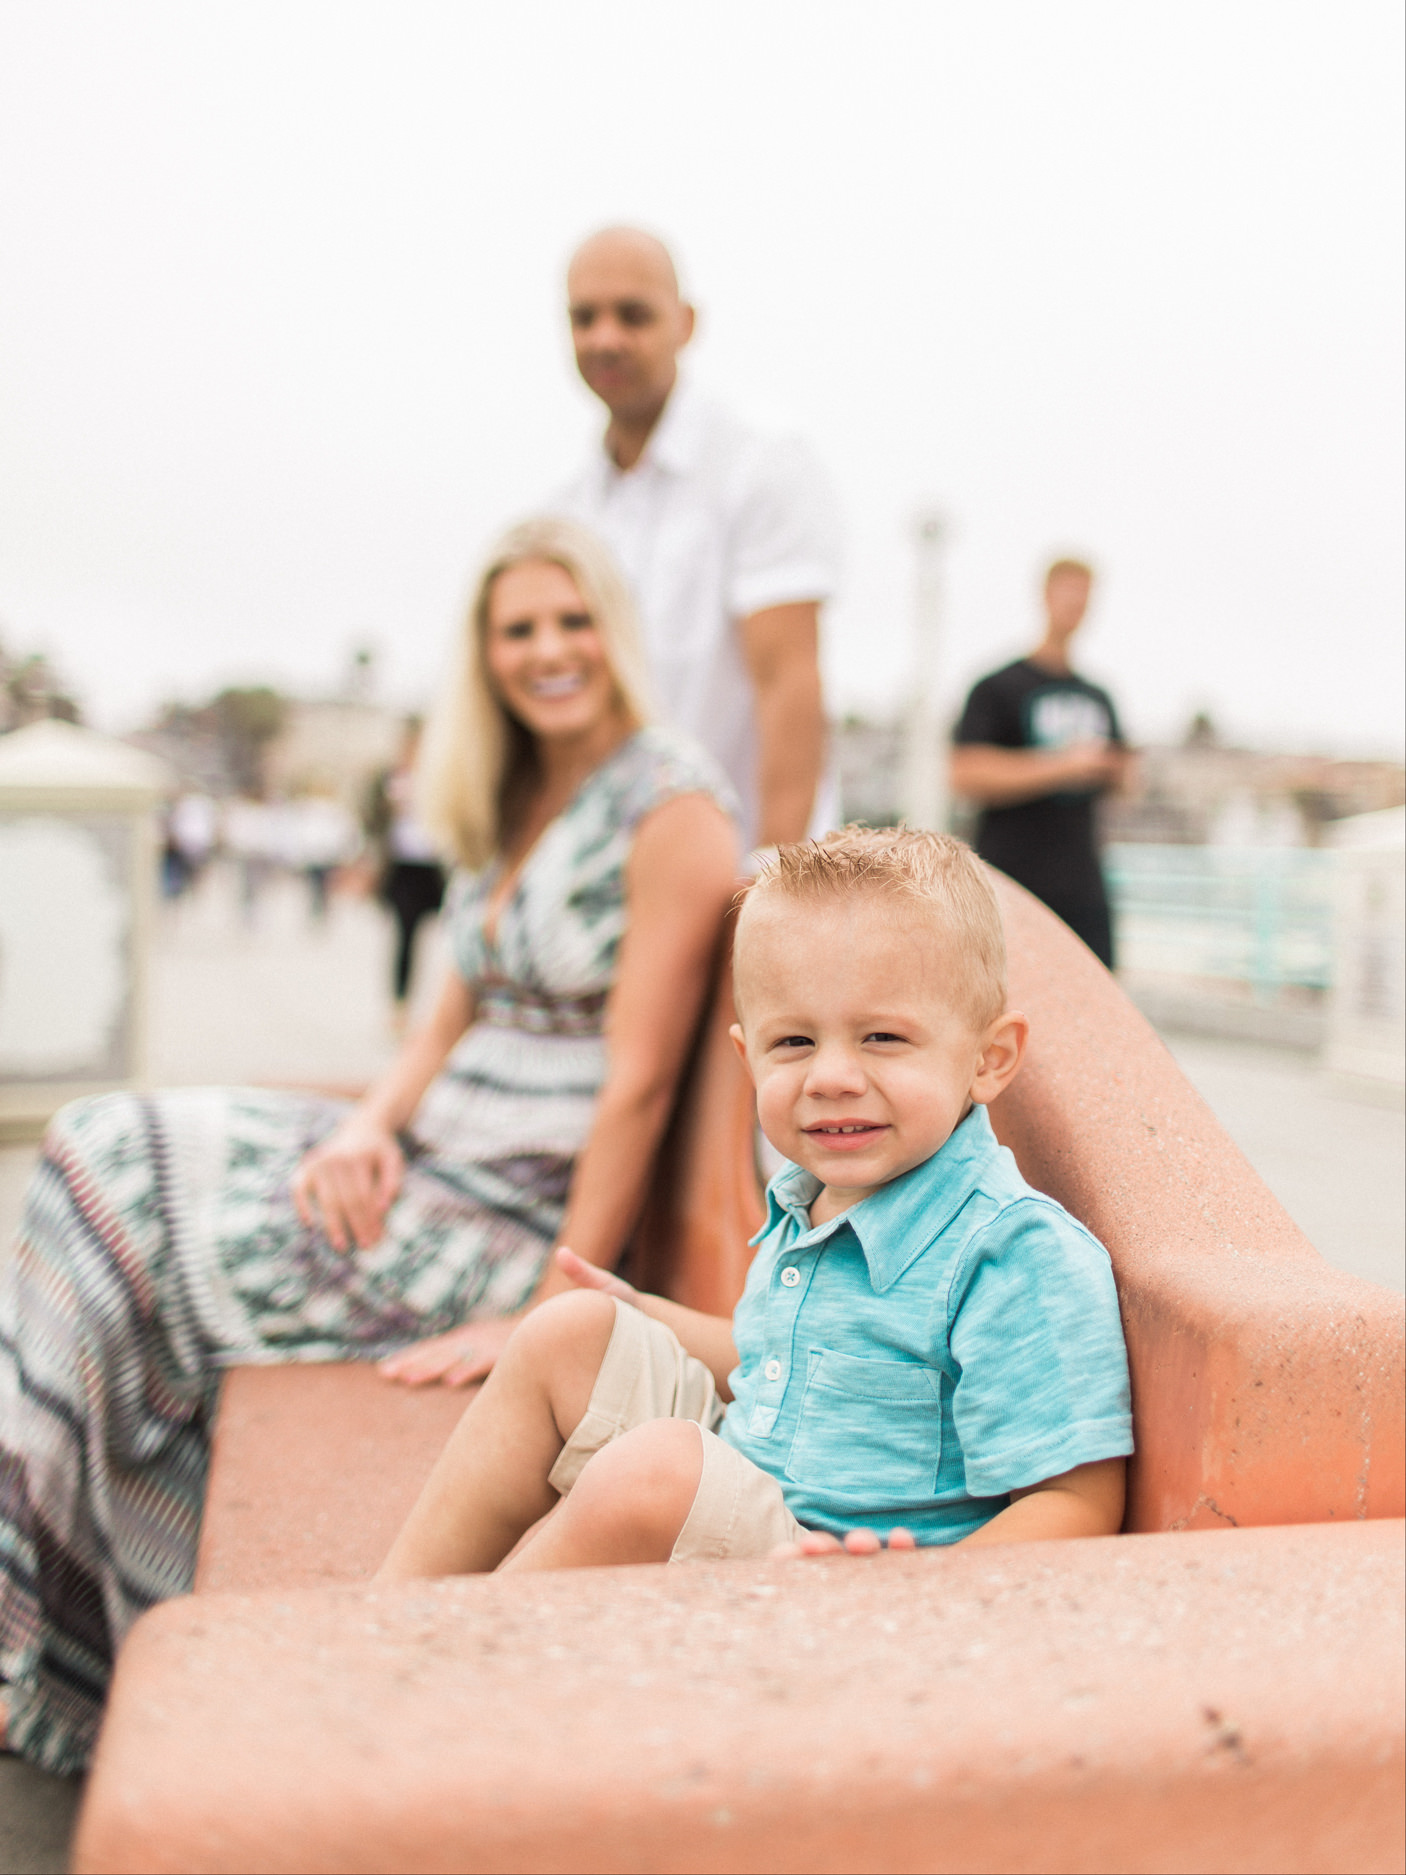  Manhattan Beach Krishnan Family Portrait Photography Session from South Bay family and wedding portrait photography business Daniel Doty Photography.  